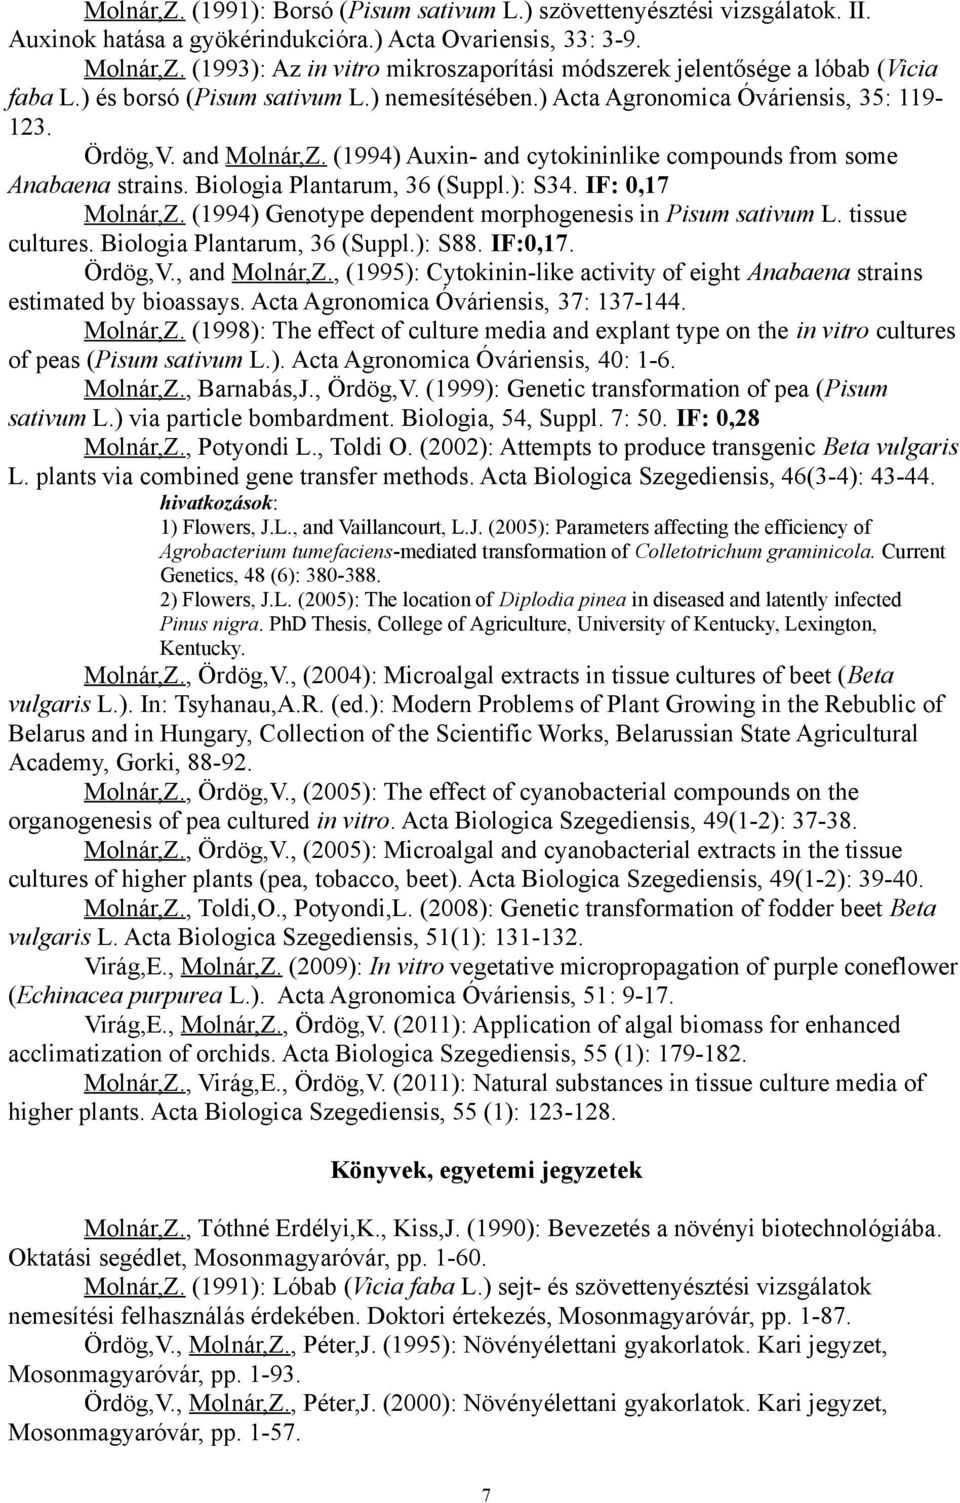 (1994) Auxin- and cytokininlike compounds from some Anabaena strains. Biologia Plantarum, 36 (Suppl.): S34. IF: 0,17 Molnár,Z. (1994) Genotype dependent morphogenesis in Pisum sativum L.